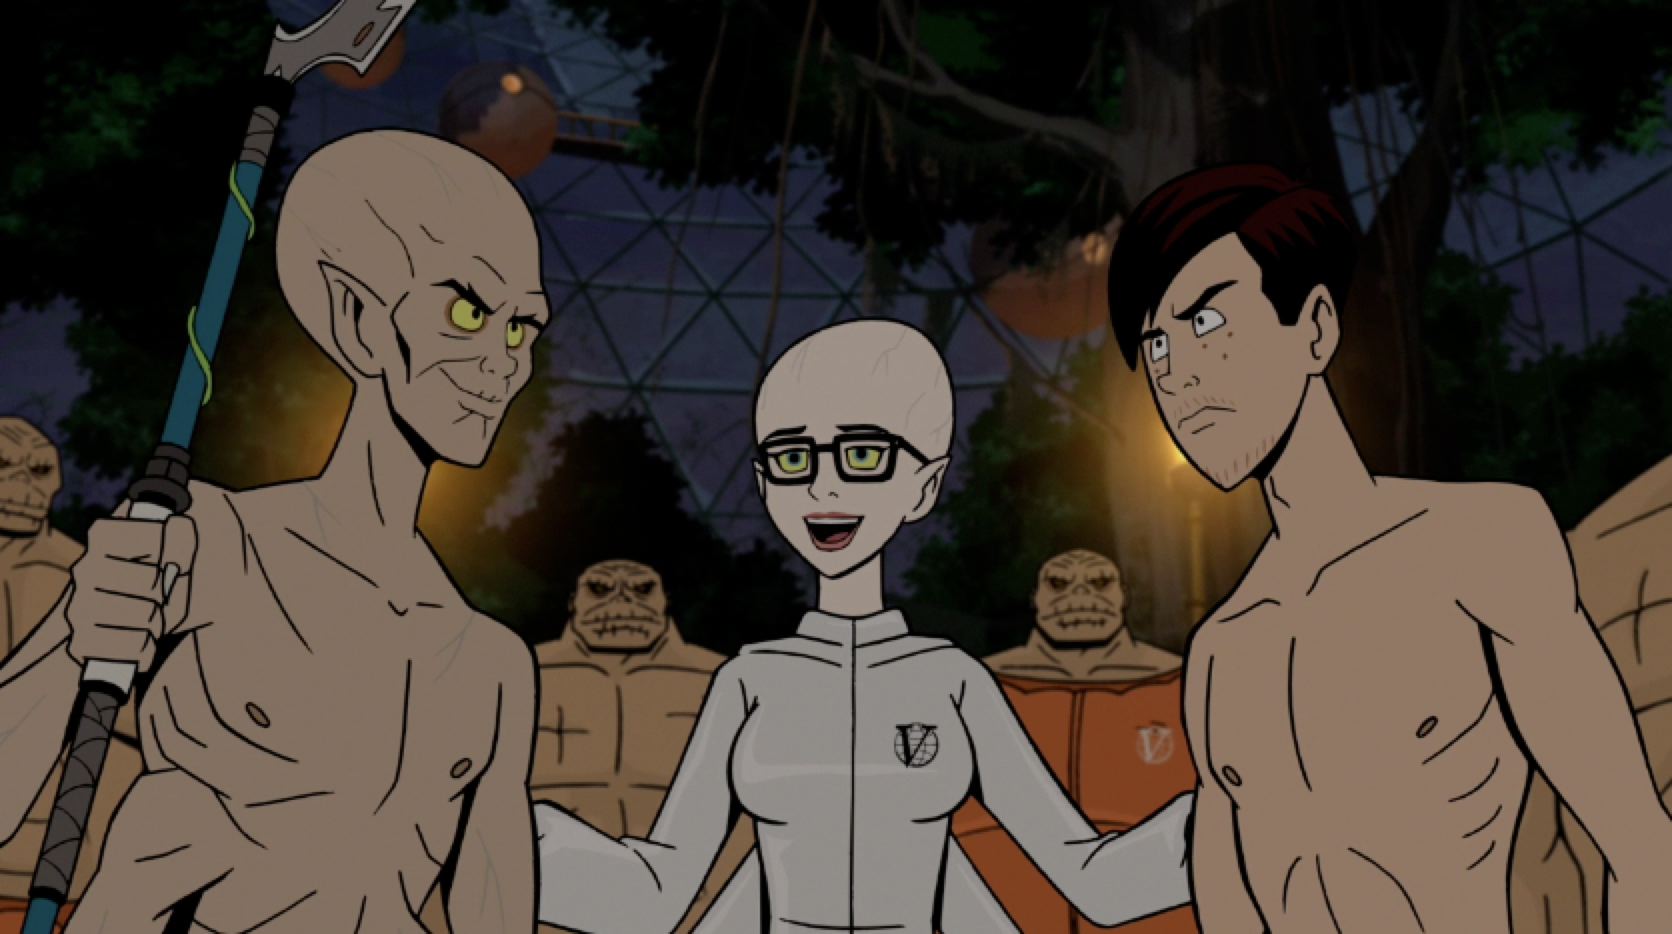 The Venture Bros "What Color is Your Cleansuit?" part 4.